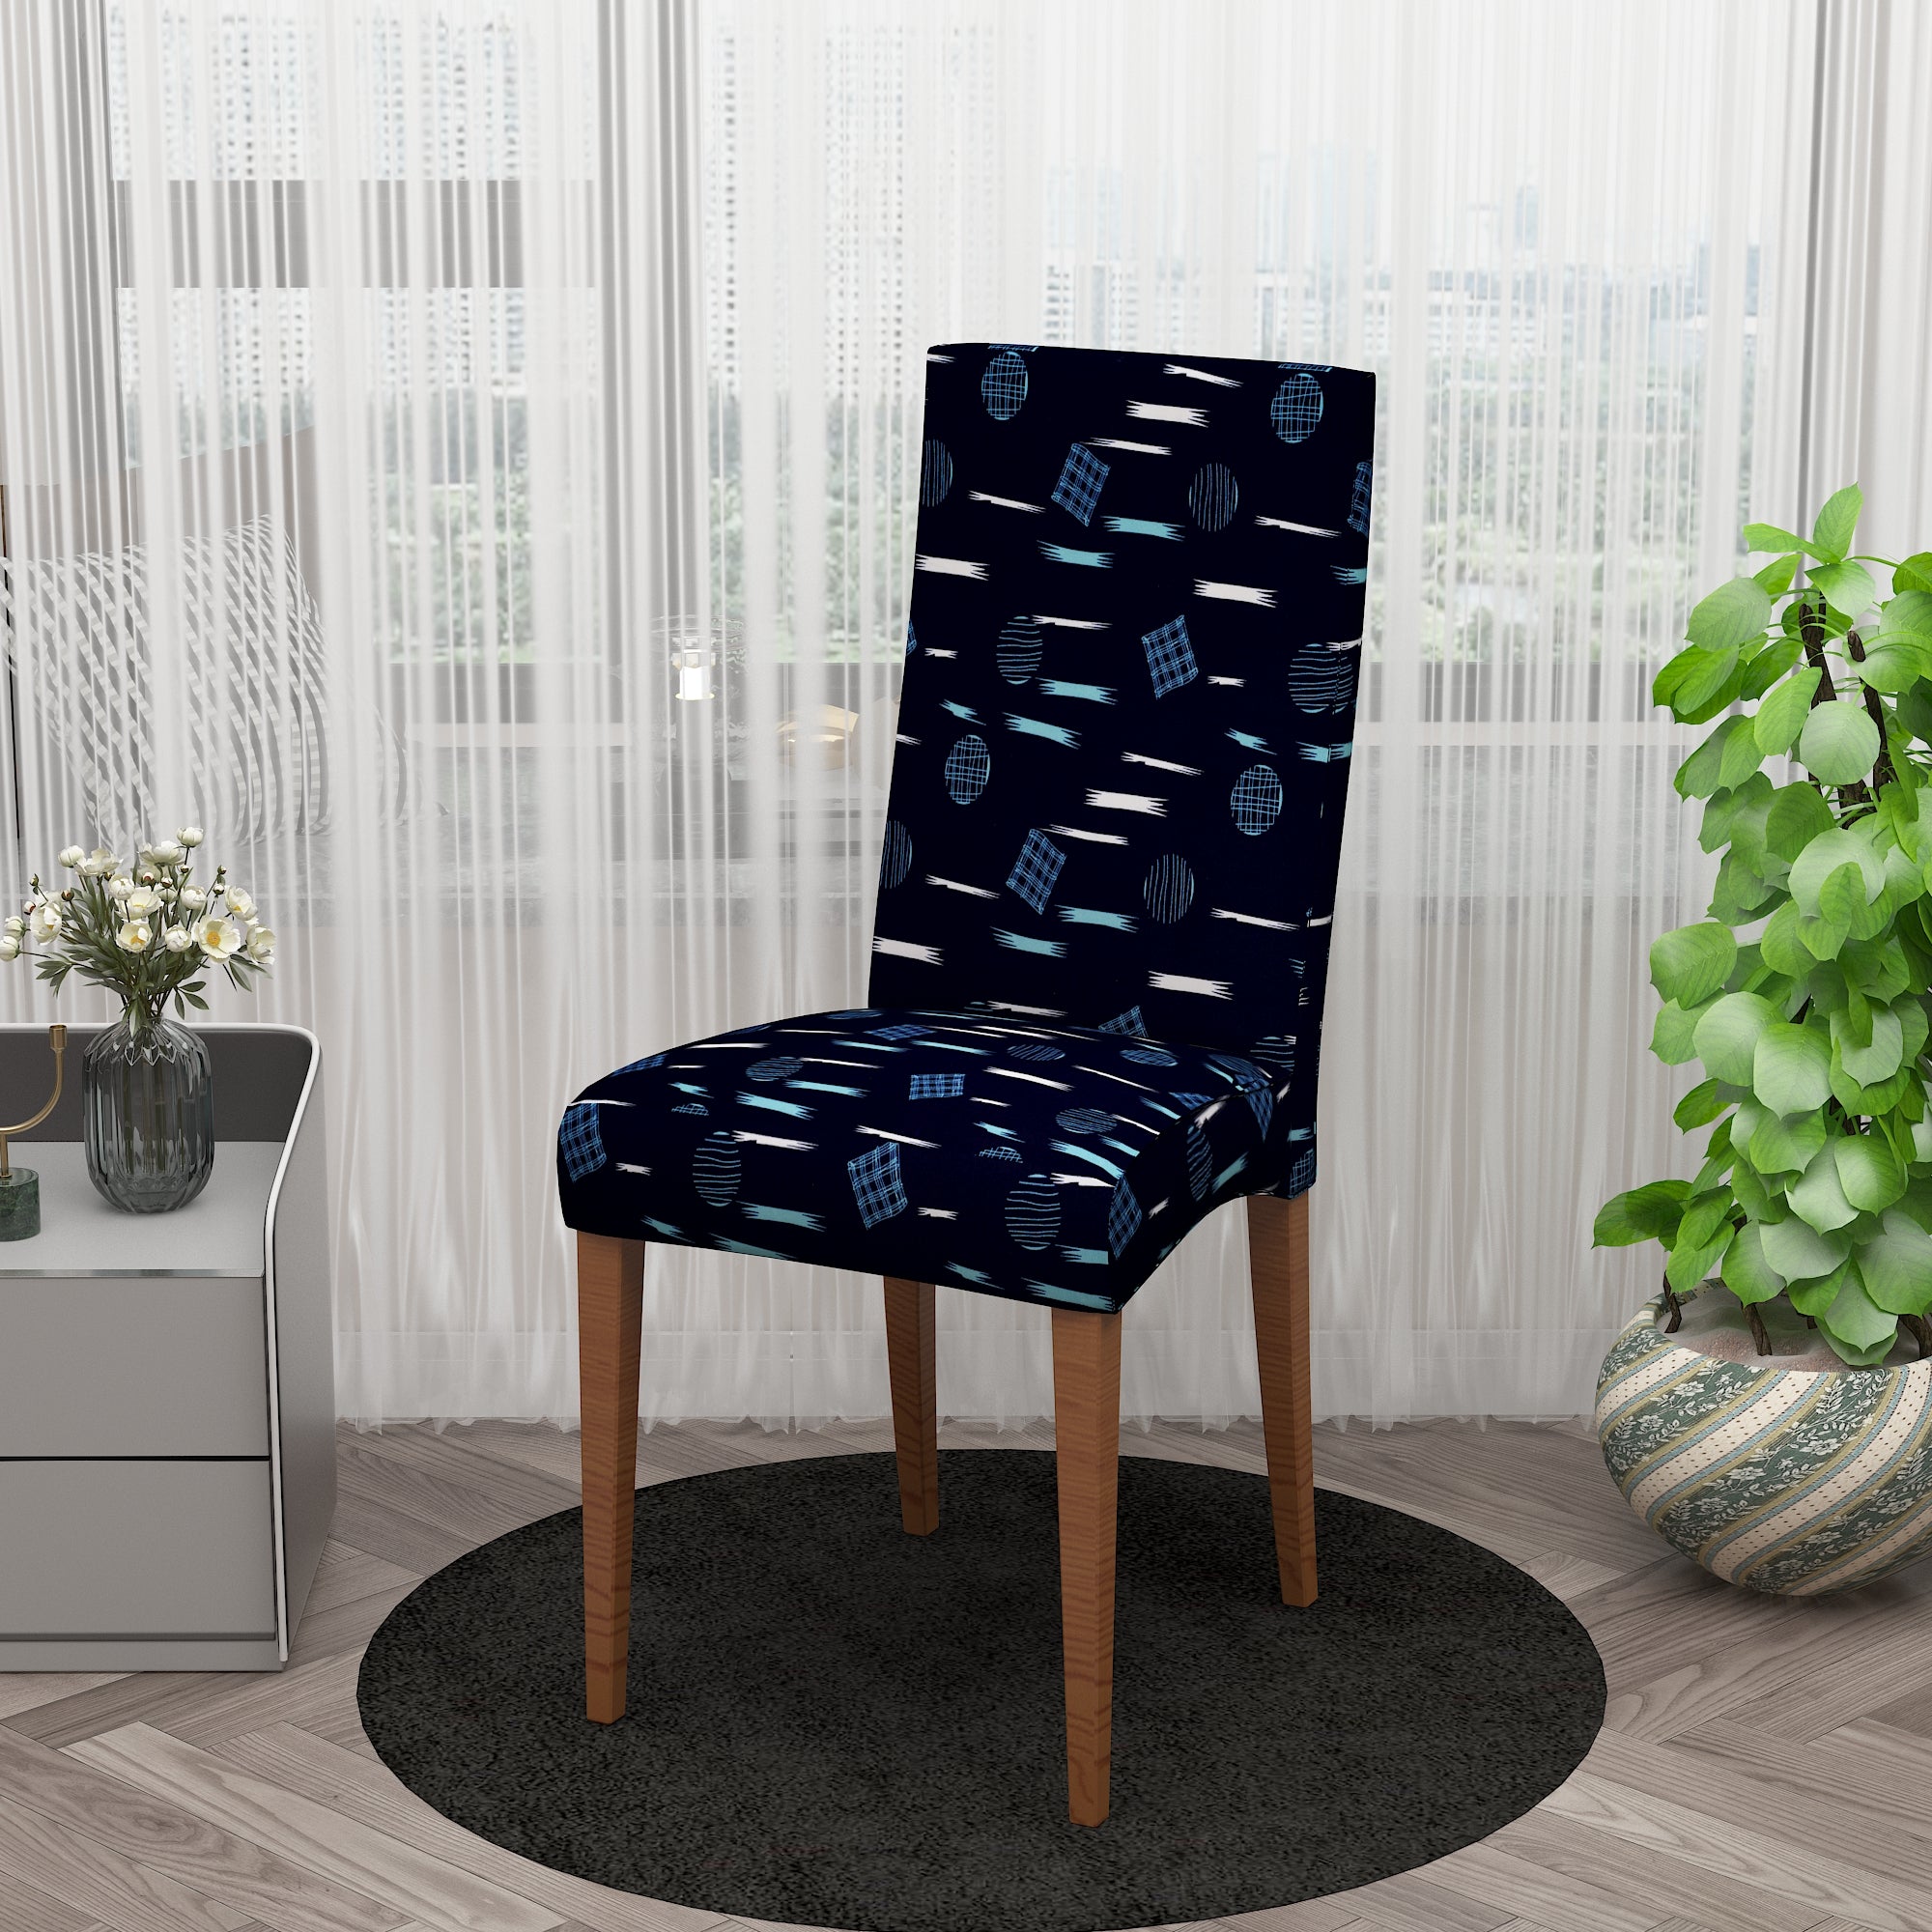 Polyester Spandex Stretchable Printed Chair Cover, MG43